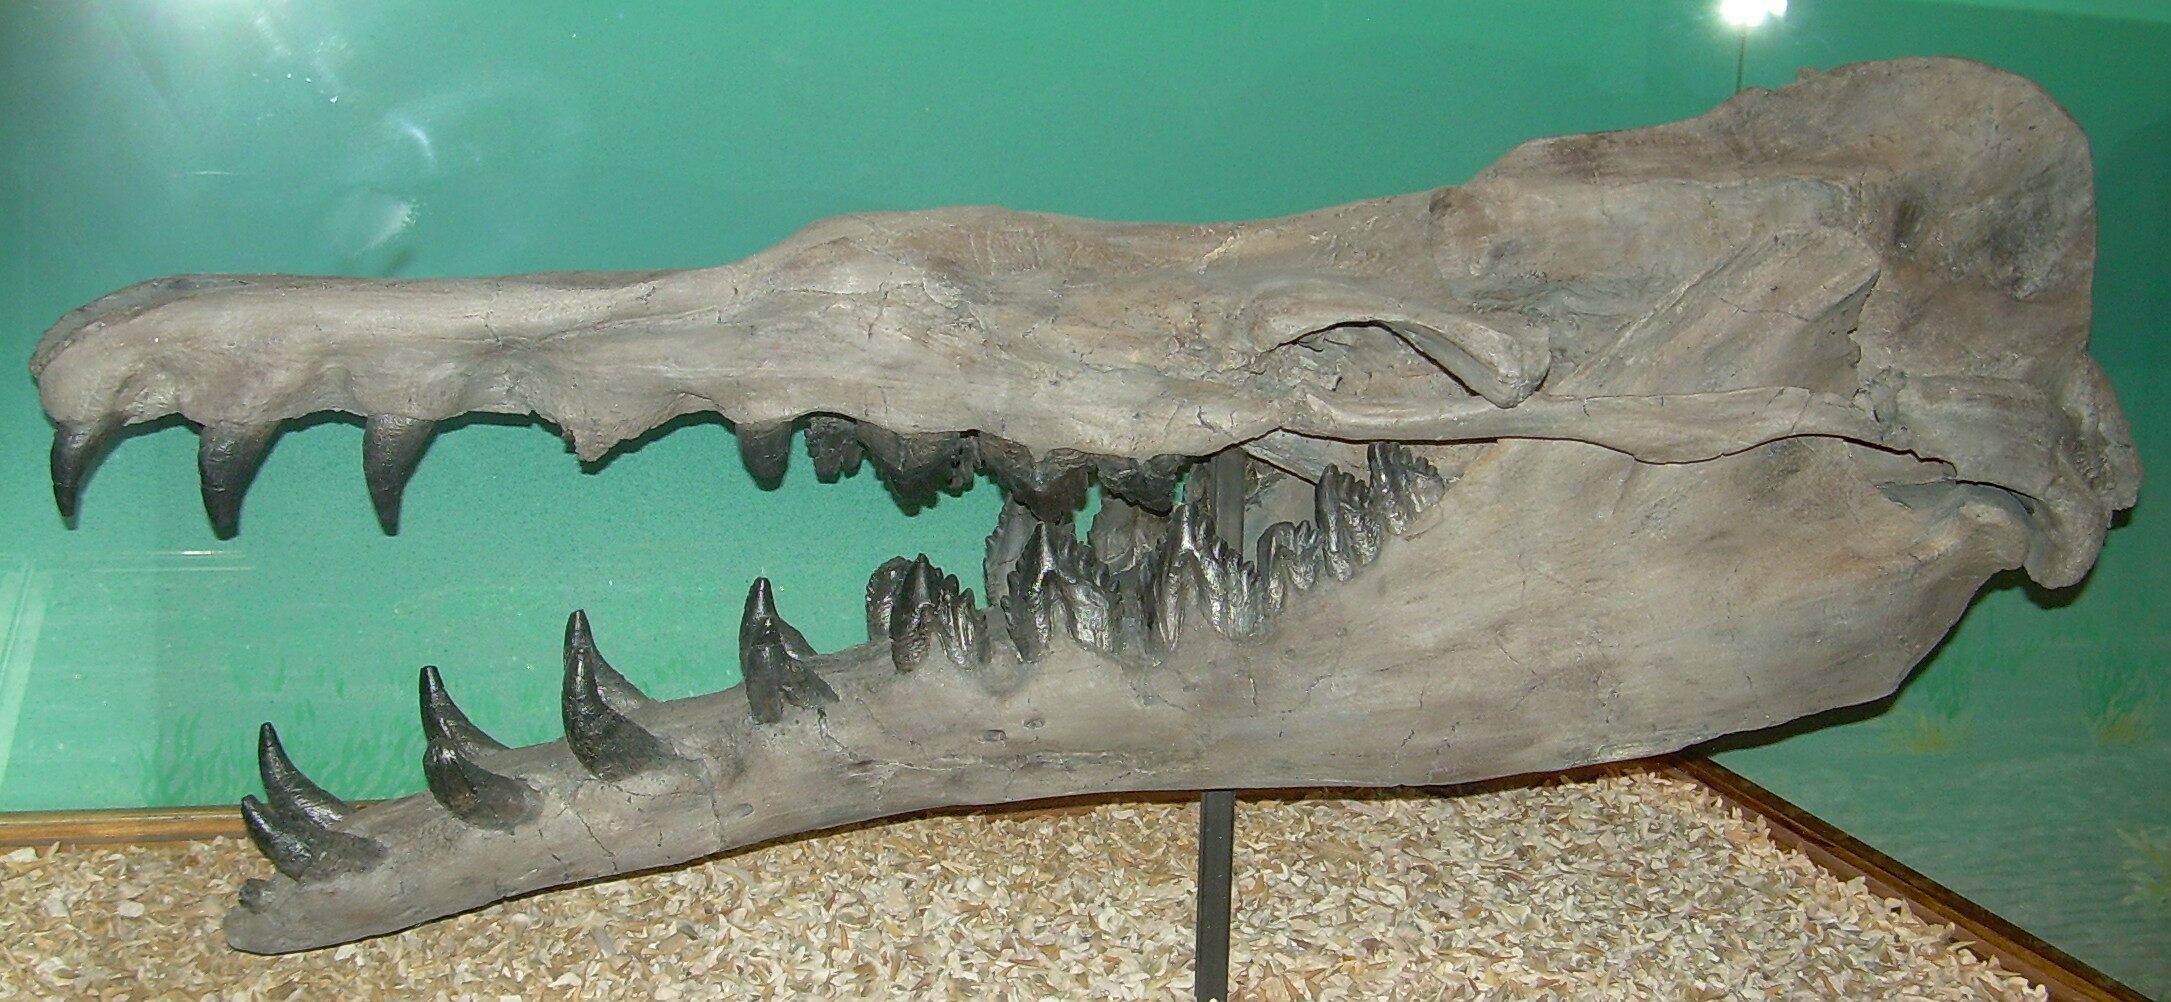 List of State Fossils 